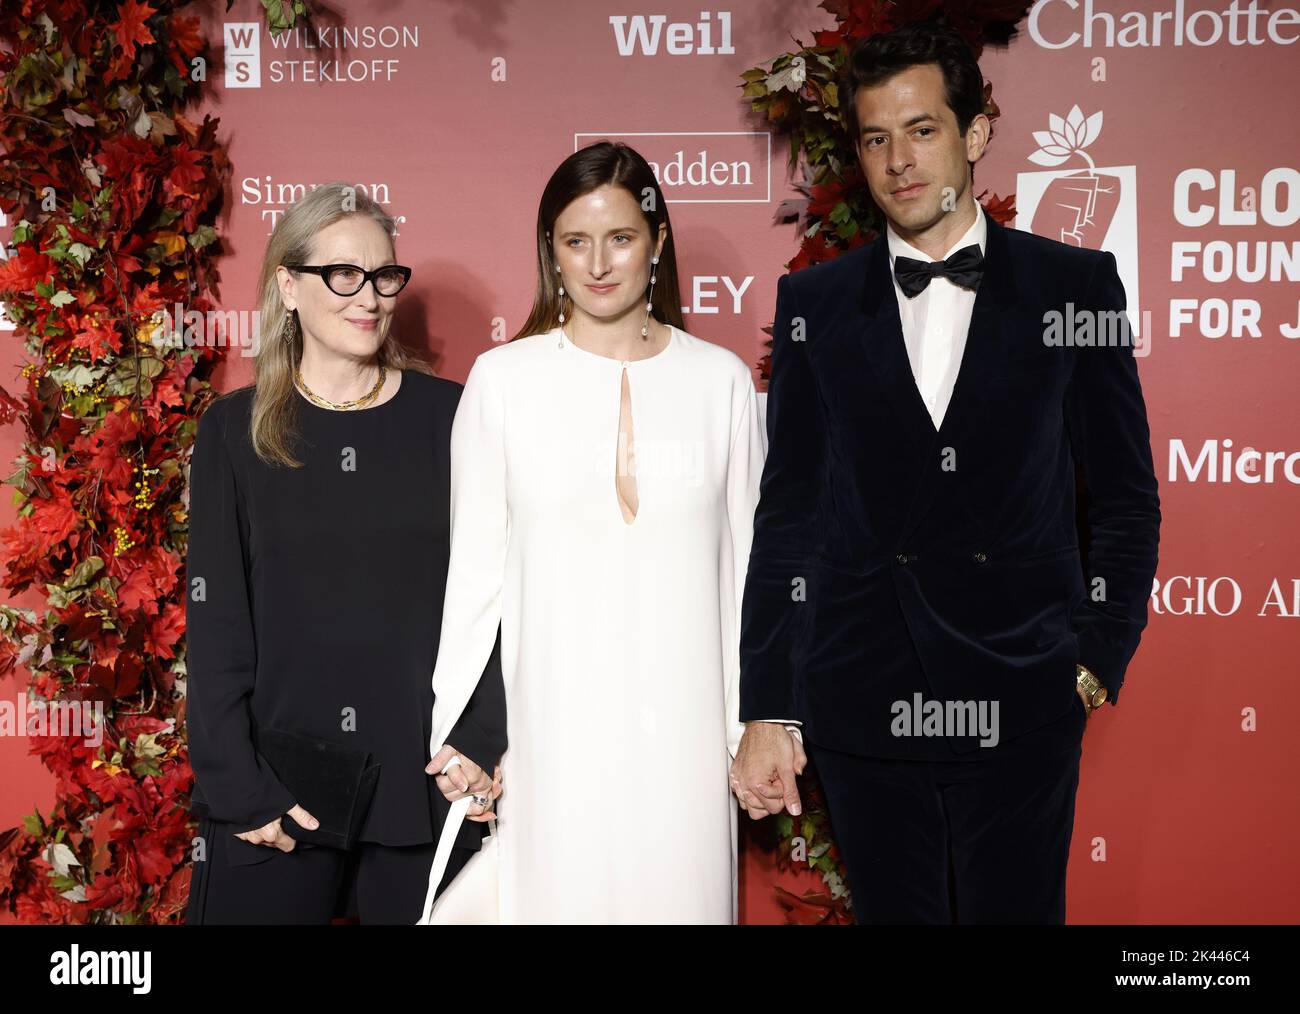 New York, United States. 29th Sep, 2022. Meryl Streep, Grace Gummer and Mark Ronson arrive on the red carpet at the Clooney Foundation For Justice Inaugural Albie Awards at New York Public Library on Thursday, September 29, 2022 in New York City. Photo by John Angelillo/UPI Credit: UPI/Alamy Live News Stock Photo